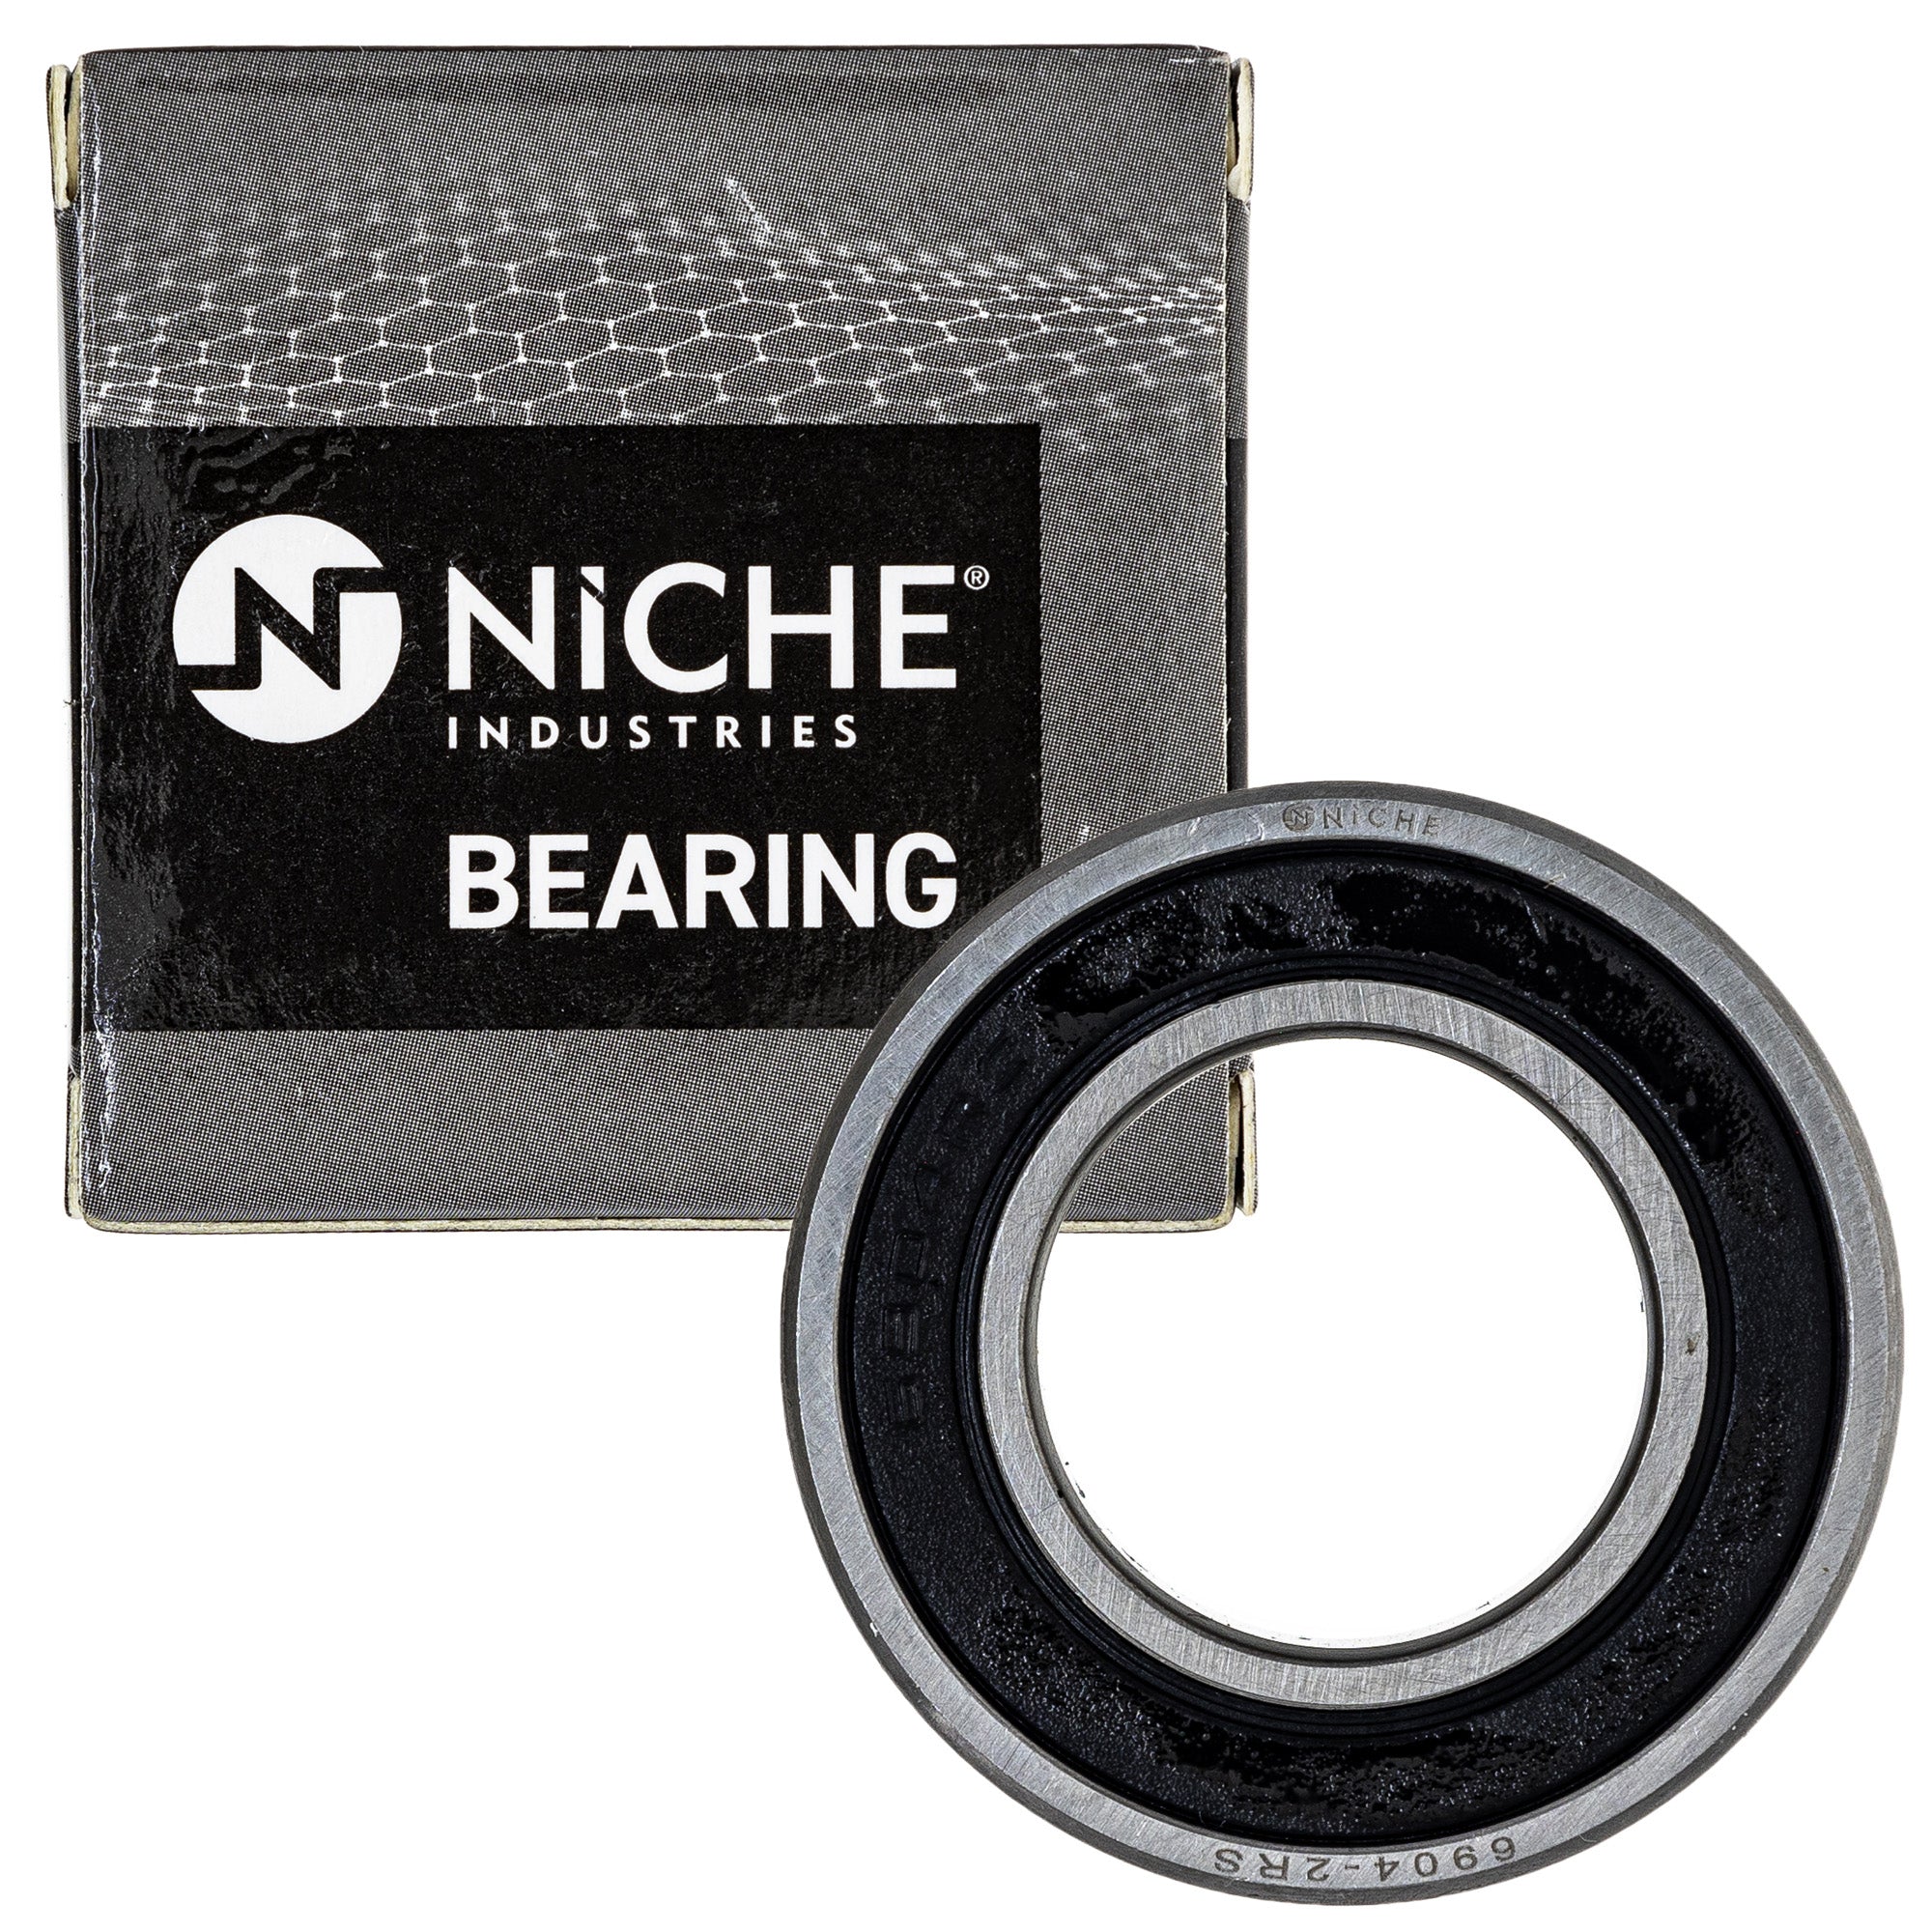 NICHE MK1009153 Wheel Bearing Seal Kit for zOTHER RM250 RM125